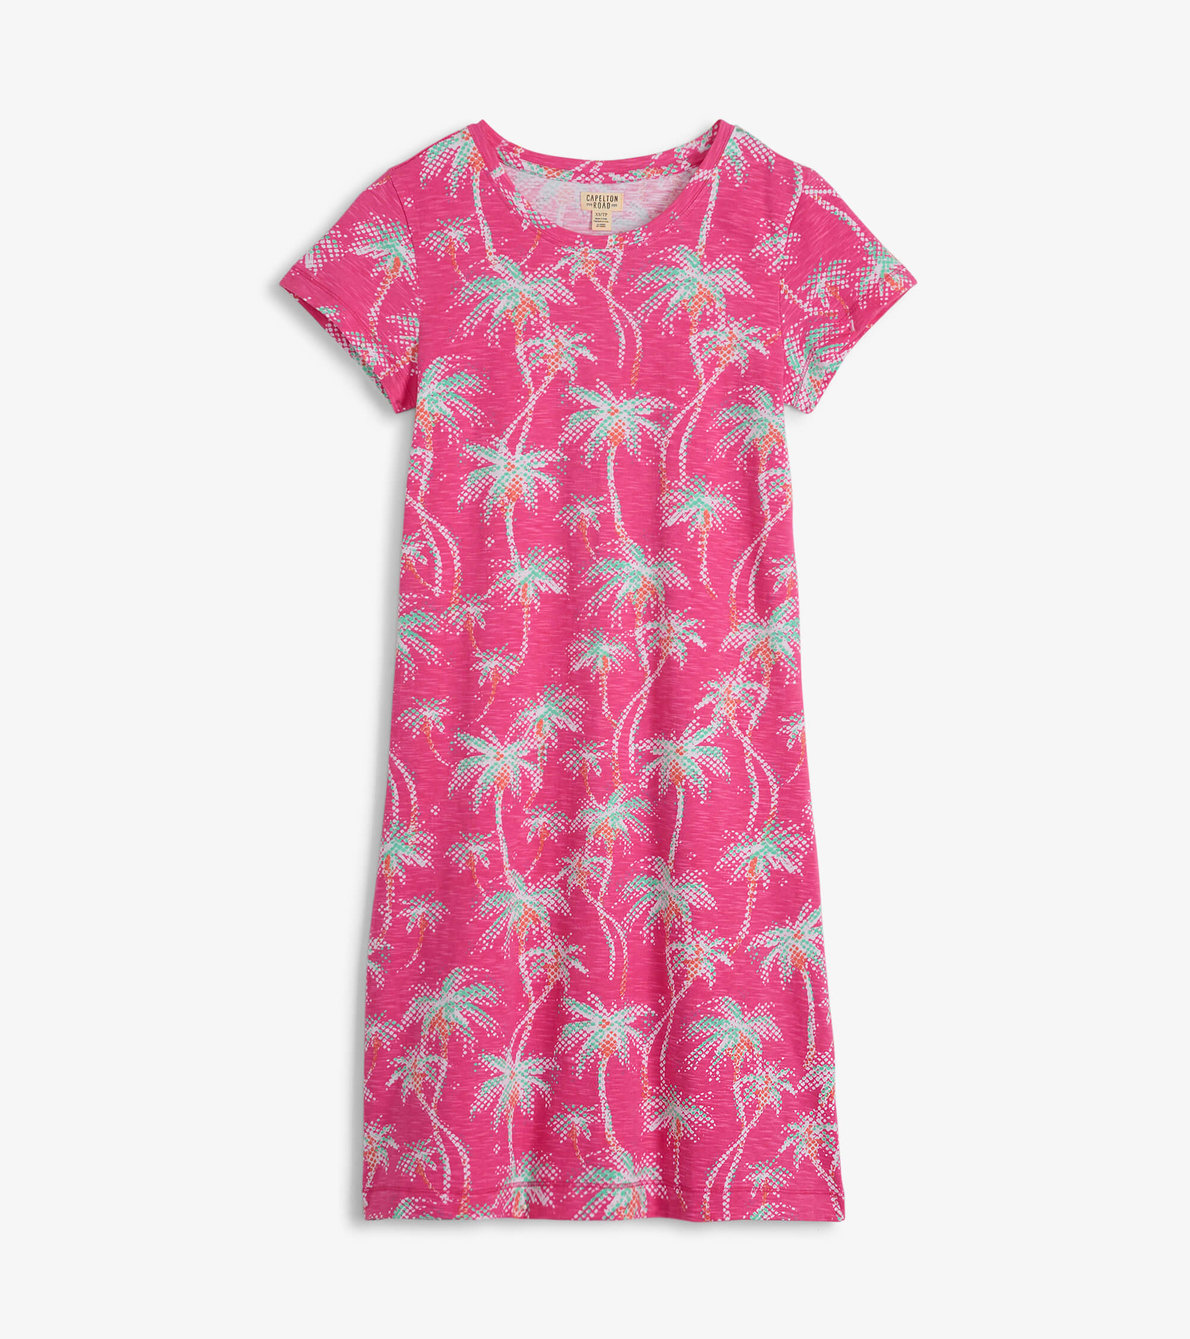 View larger image of Women's Palm Trees Crew Neck Tee Dress